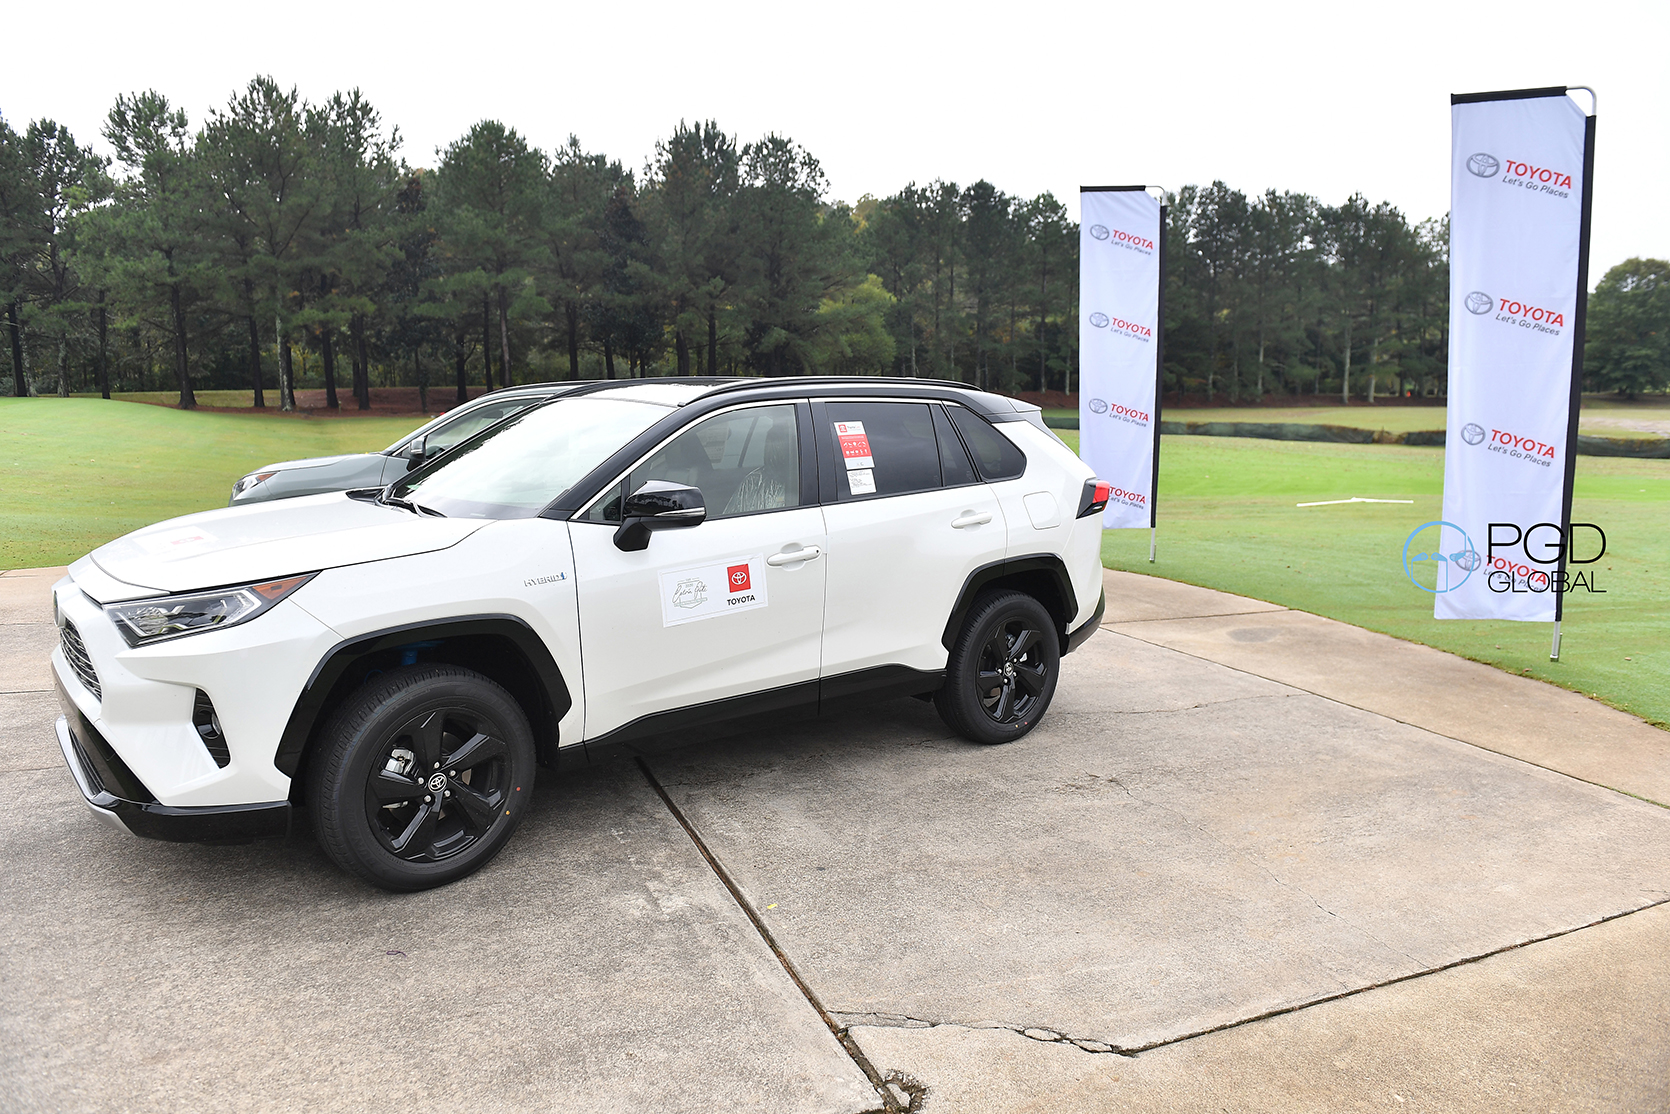 The 2020 Calvin Peete Awards & Golf Tournament presented by TOYOTA featured a 2021 RAV4 Hybrid on display for all participants to view.